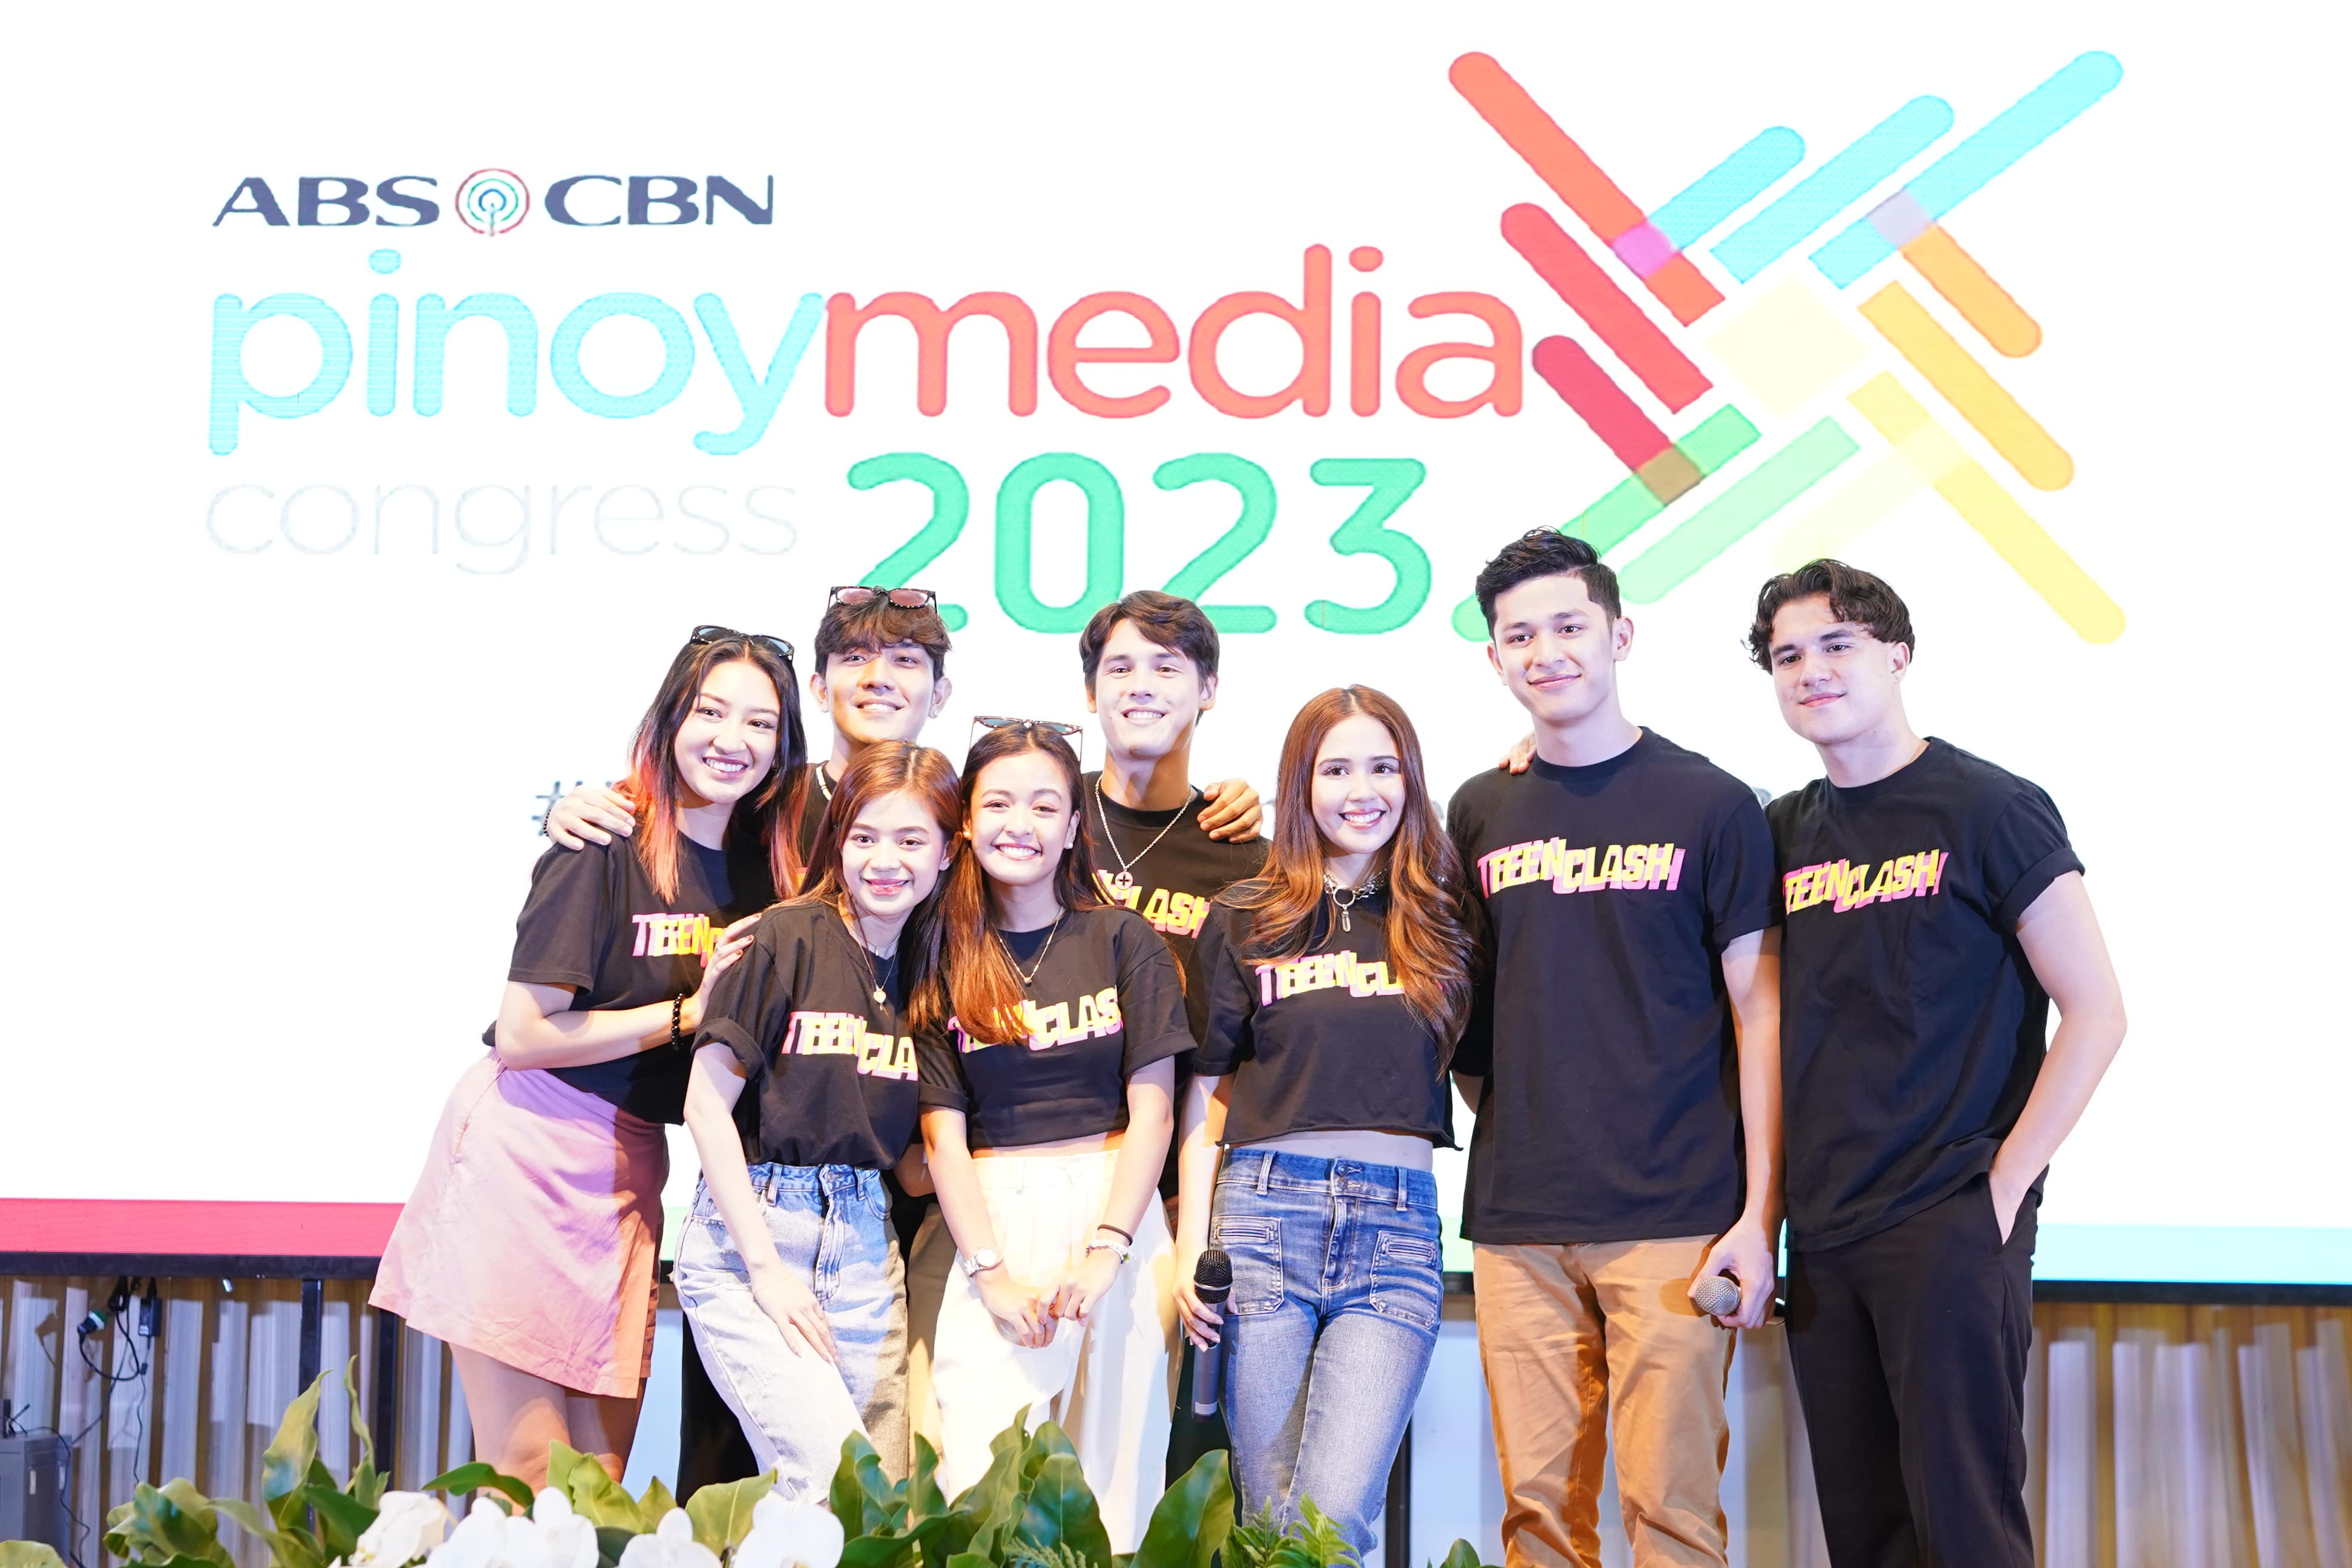 Teen Clash stars join the fun at the Pinoy Media Congress 2023